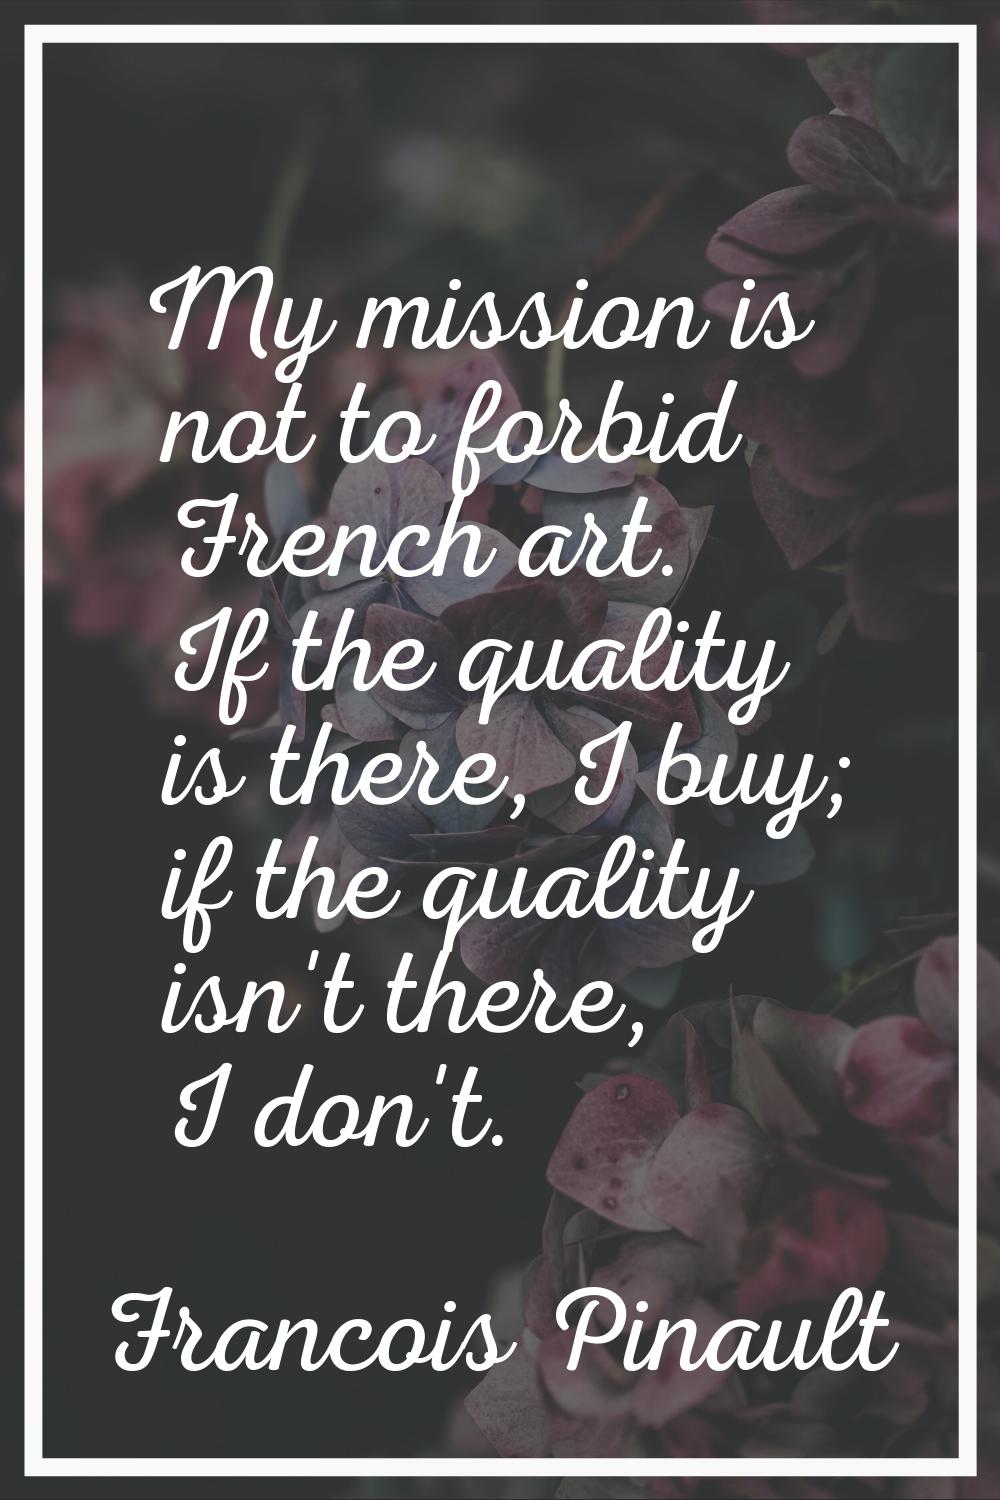 My mission is not to forbid French art. If the quality is there, I buy; if the quality isn't there,